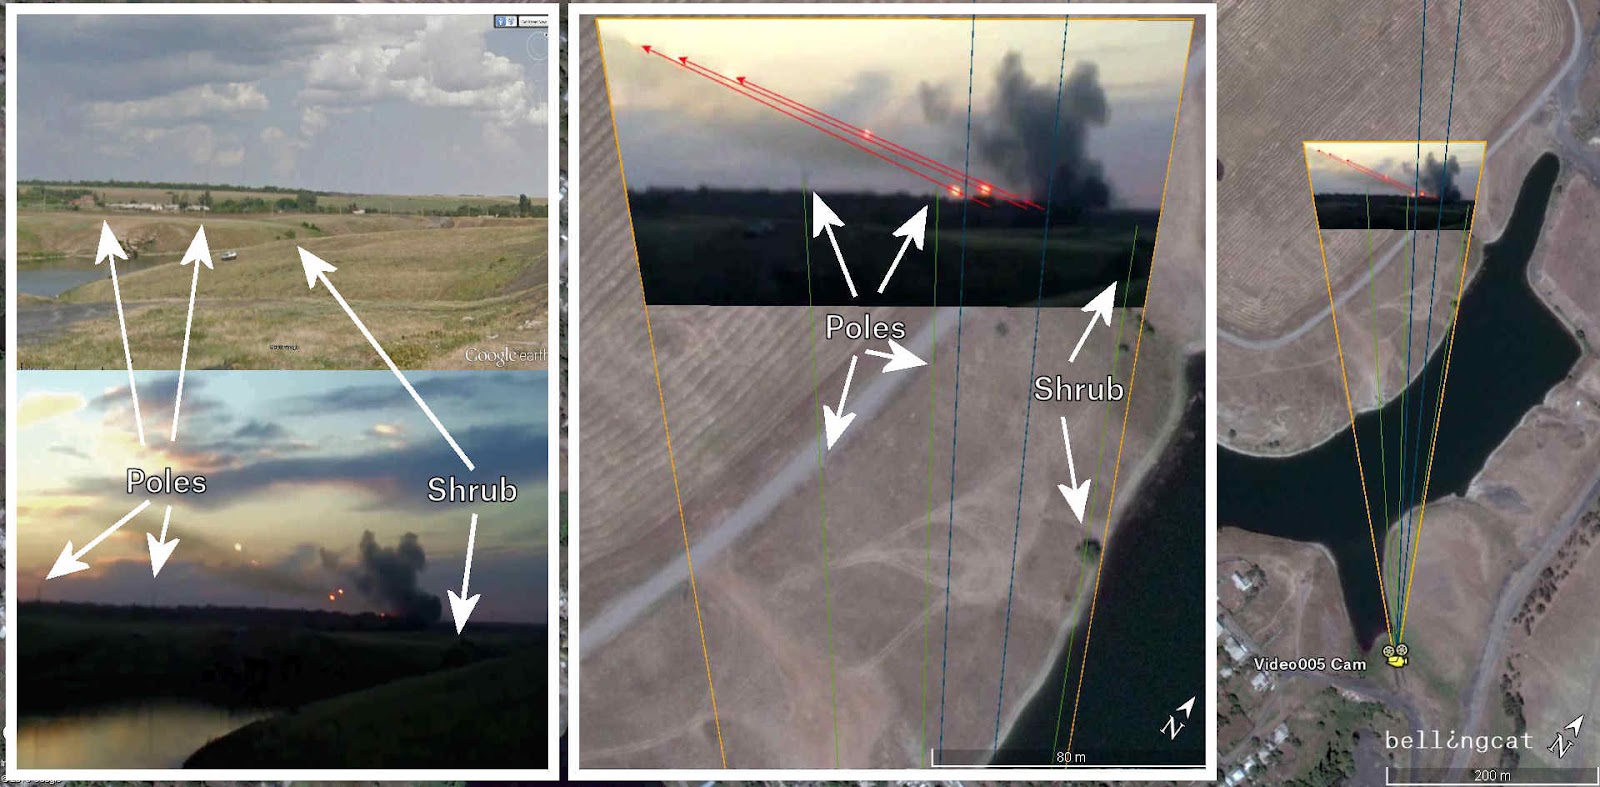 Camera location of Video005 – blue lines in the middle point toward the firing position